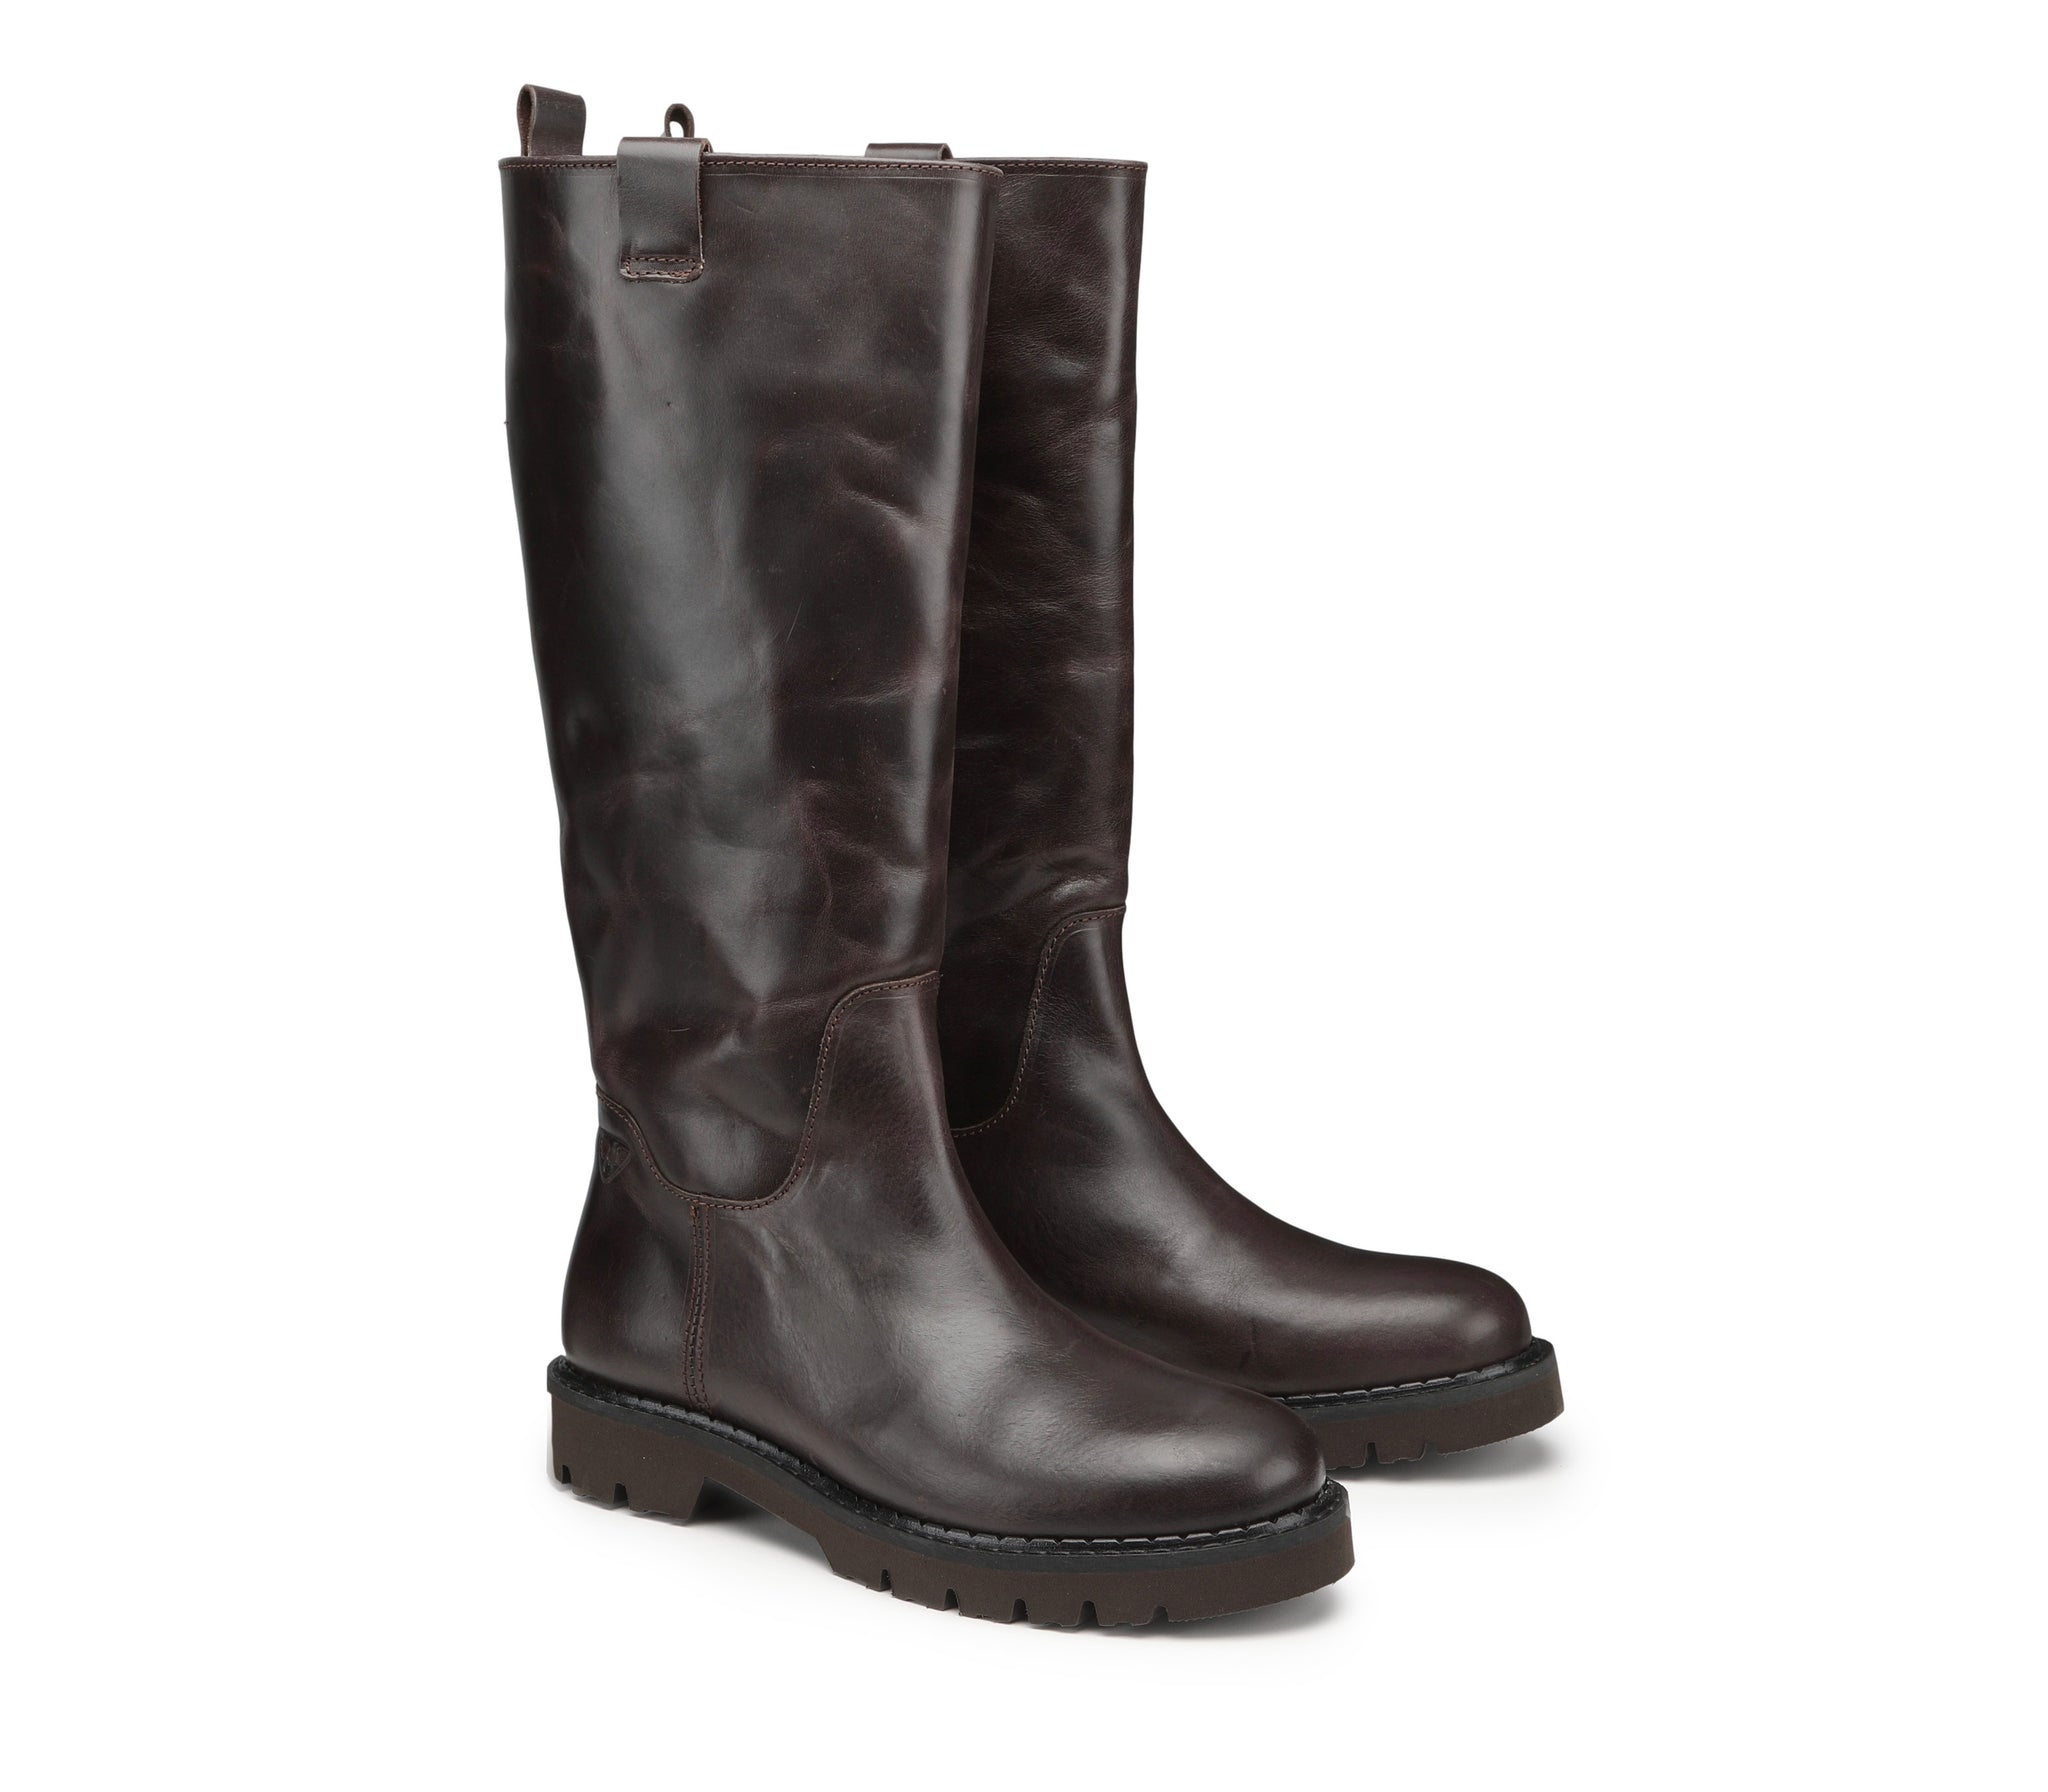 Women's Leather Boots with Round Toe and Knee-Length Gambit 